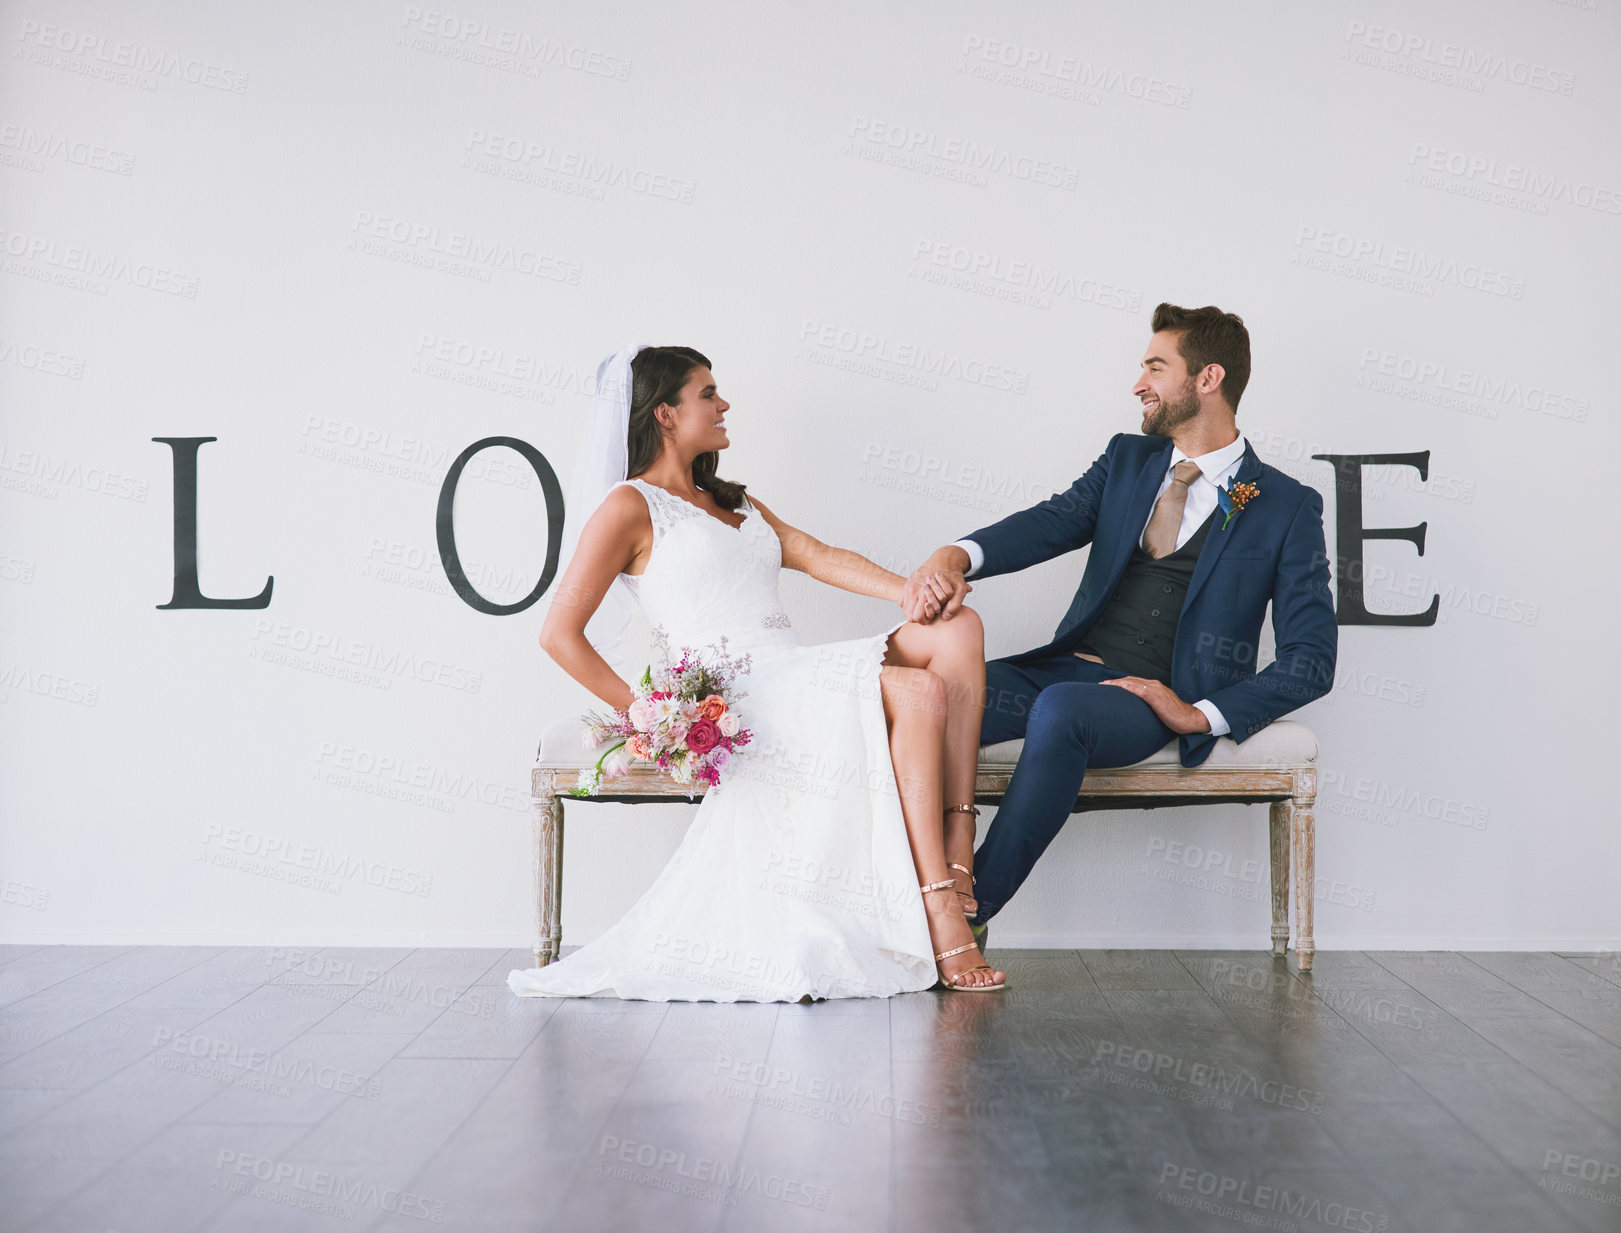 Buy stock photo Concept studio shot of a bride and groom making an V in the word “love” against a wall